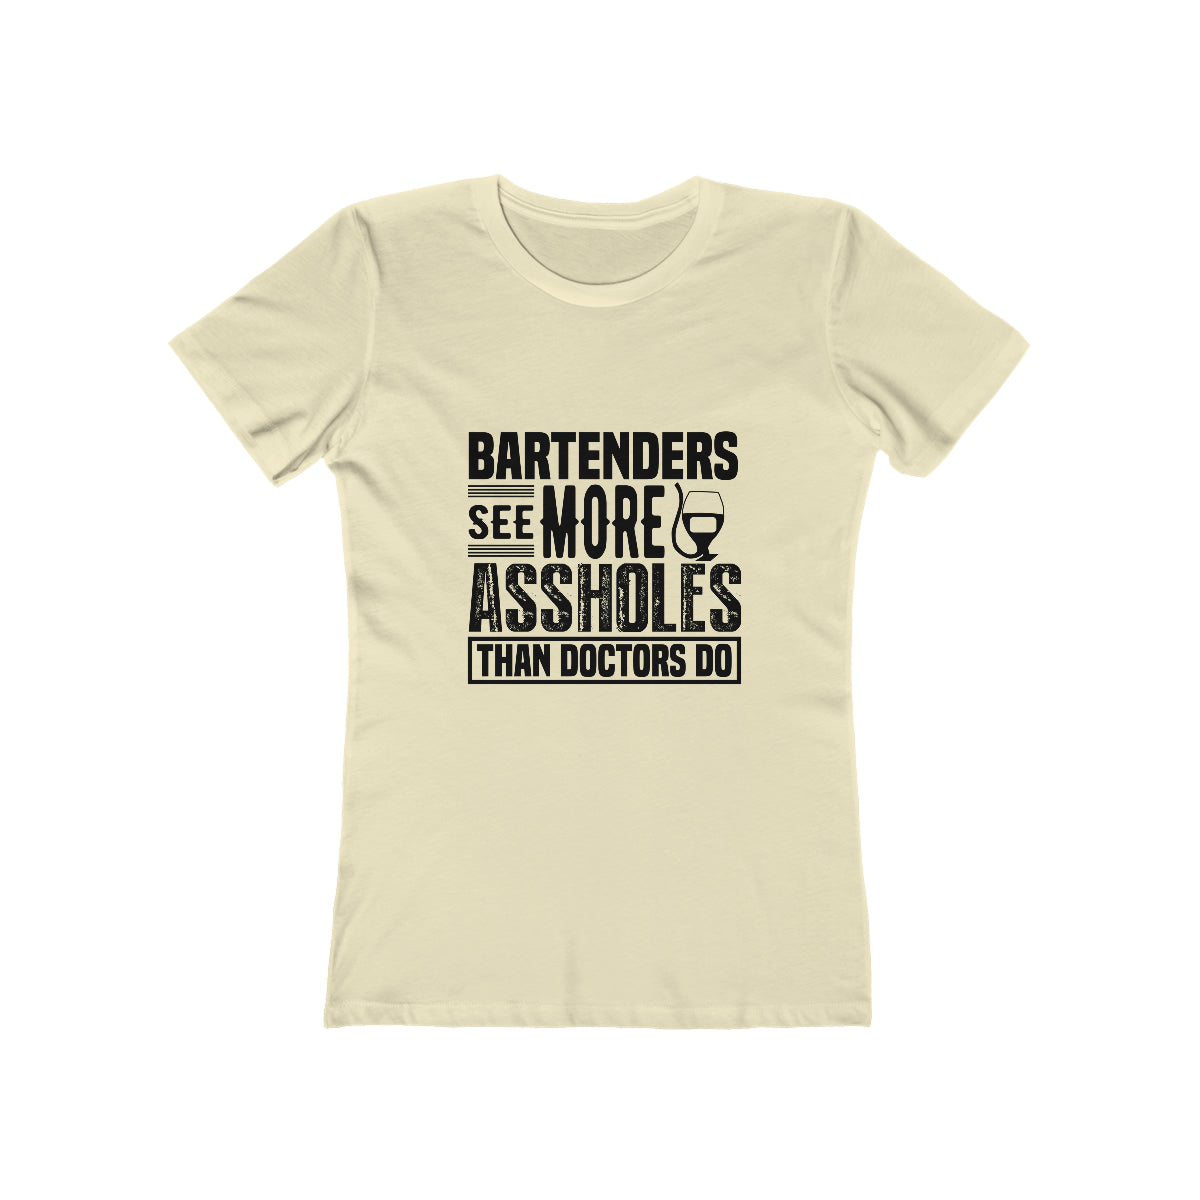 Bartenders See More Assholes Than Doctors Do - Women's T-shirt